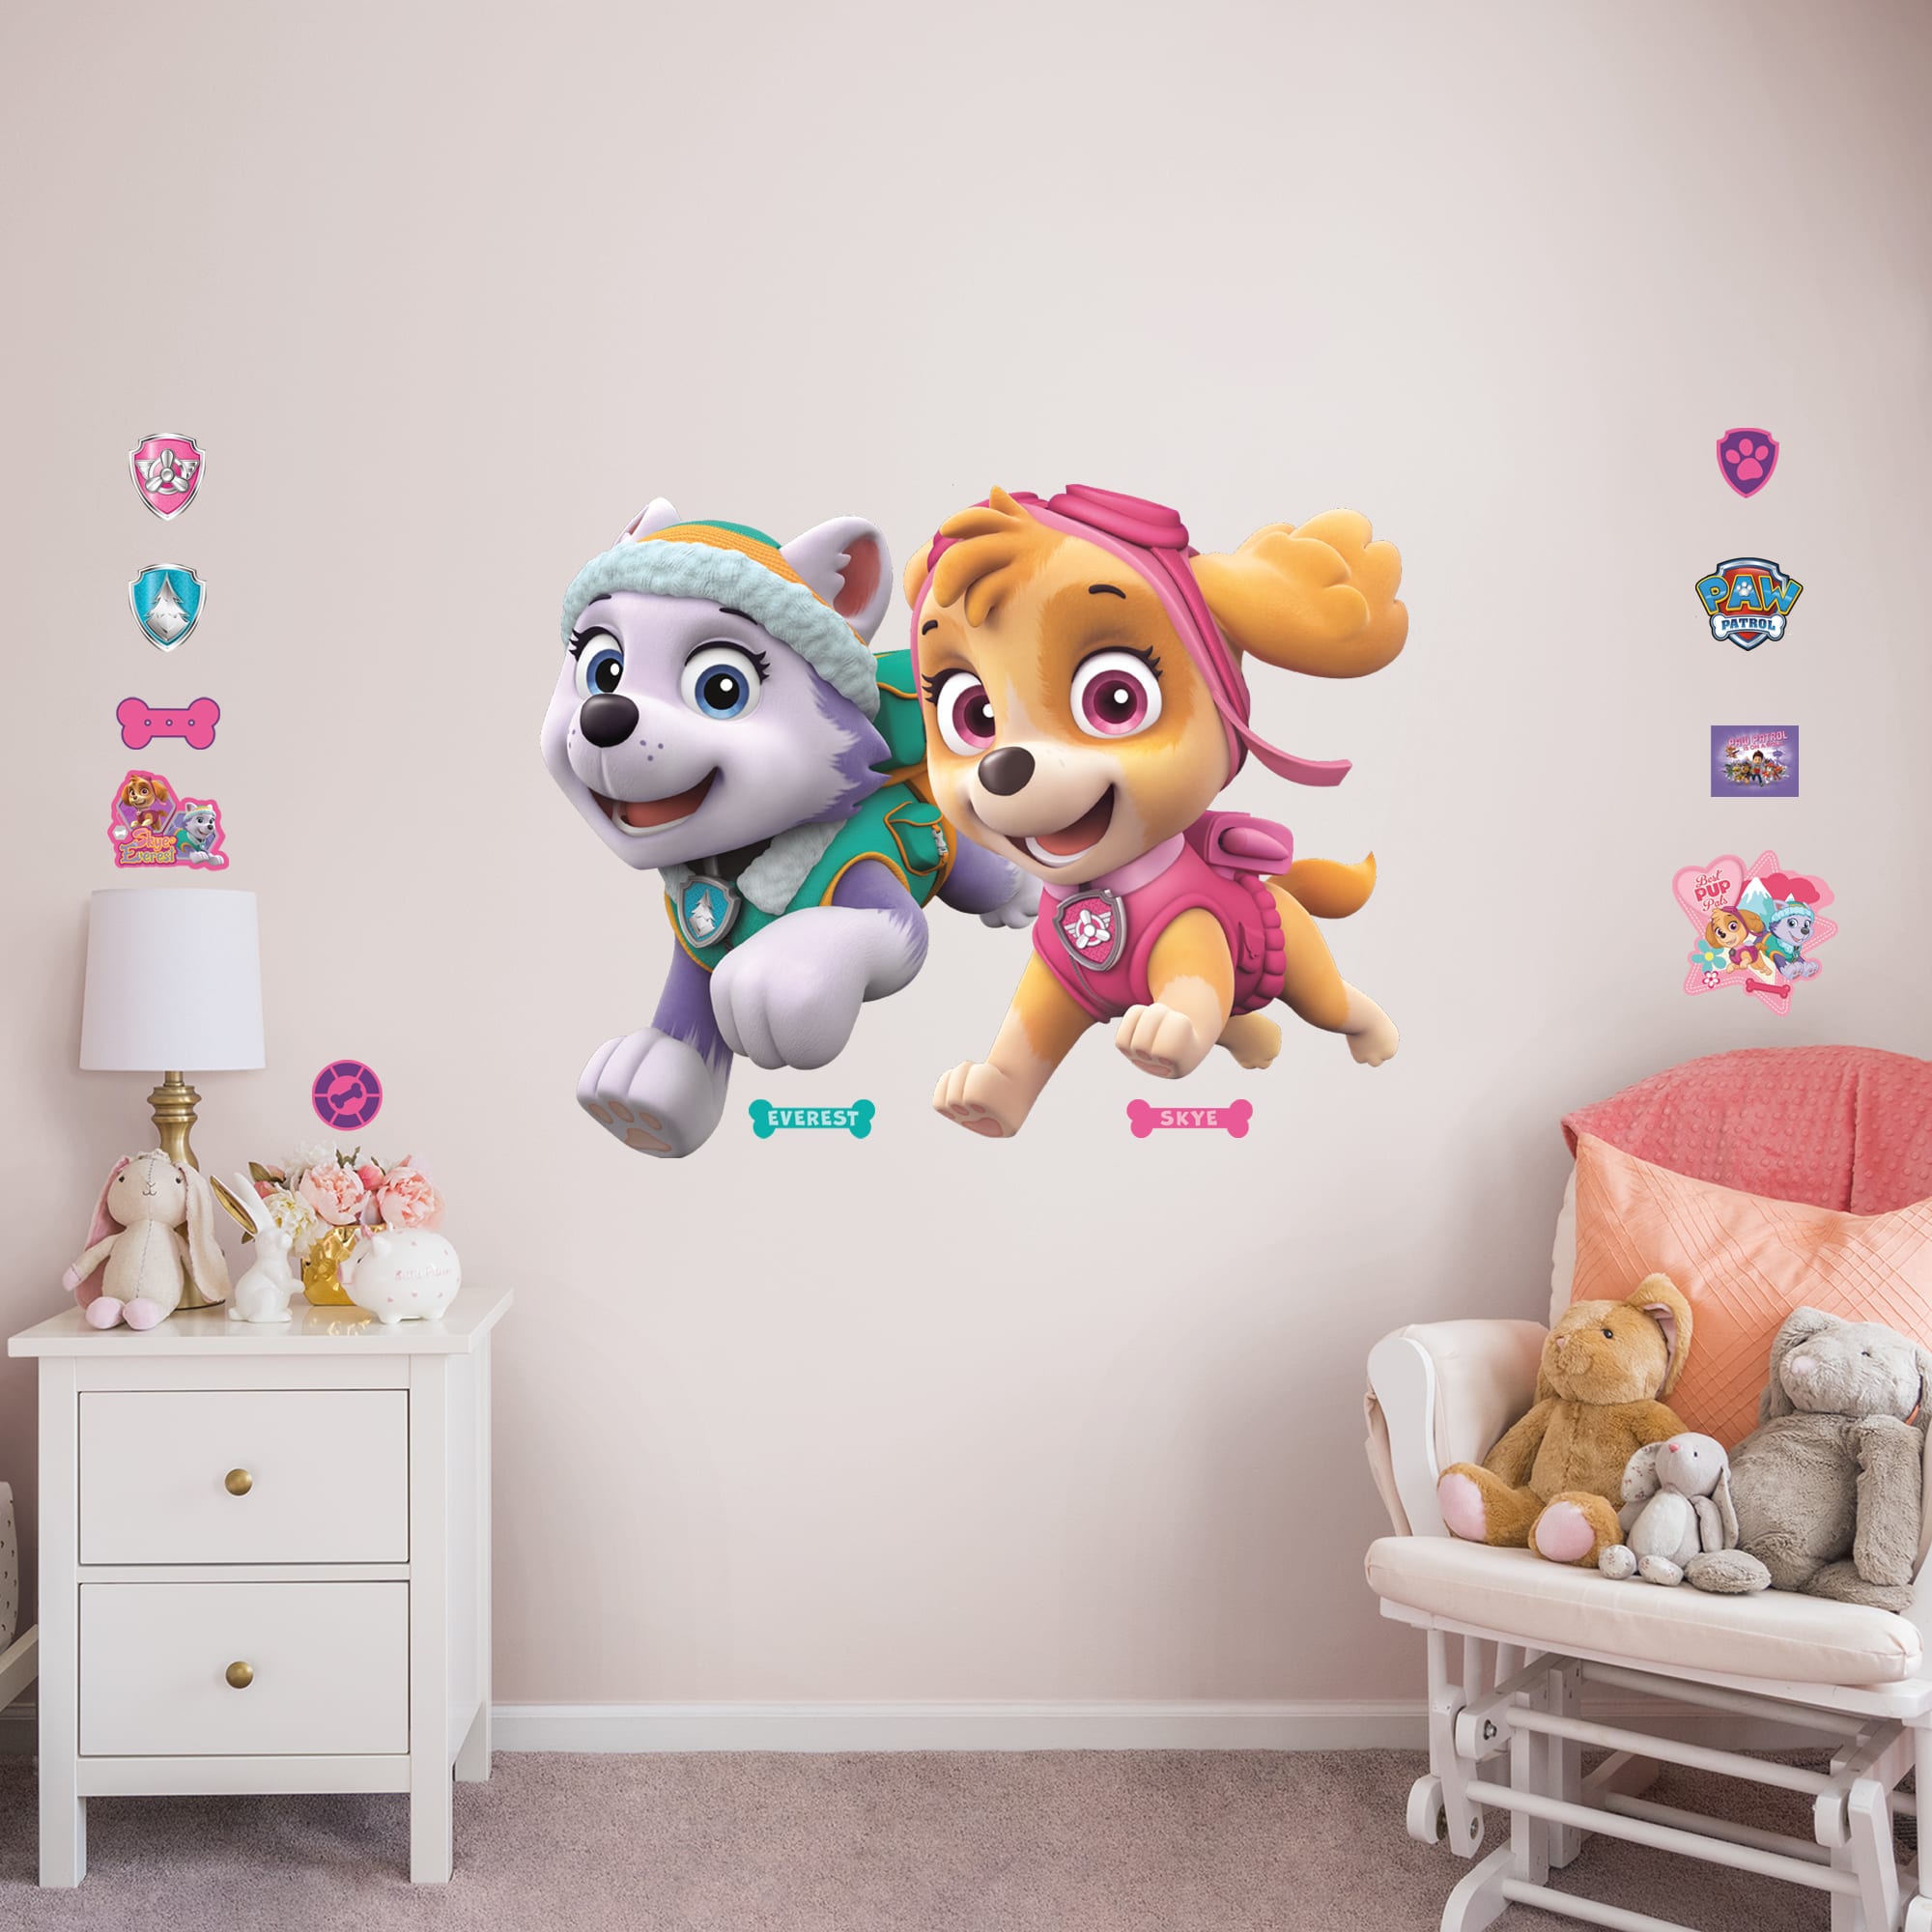 PAW Patrol: Girl Pups - Officially Licensed Removable Wall Decal Giant Character + 13 Licensed Decals (48"W x 37"H) by Fathead |